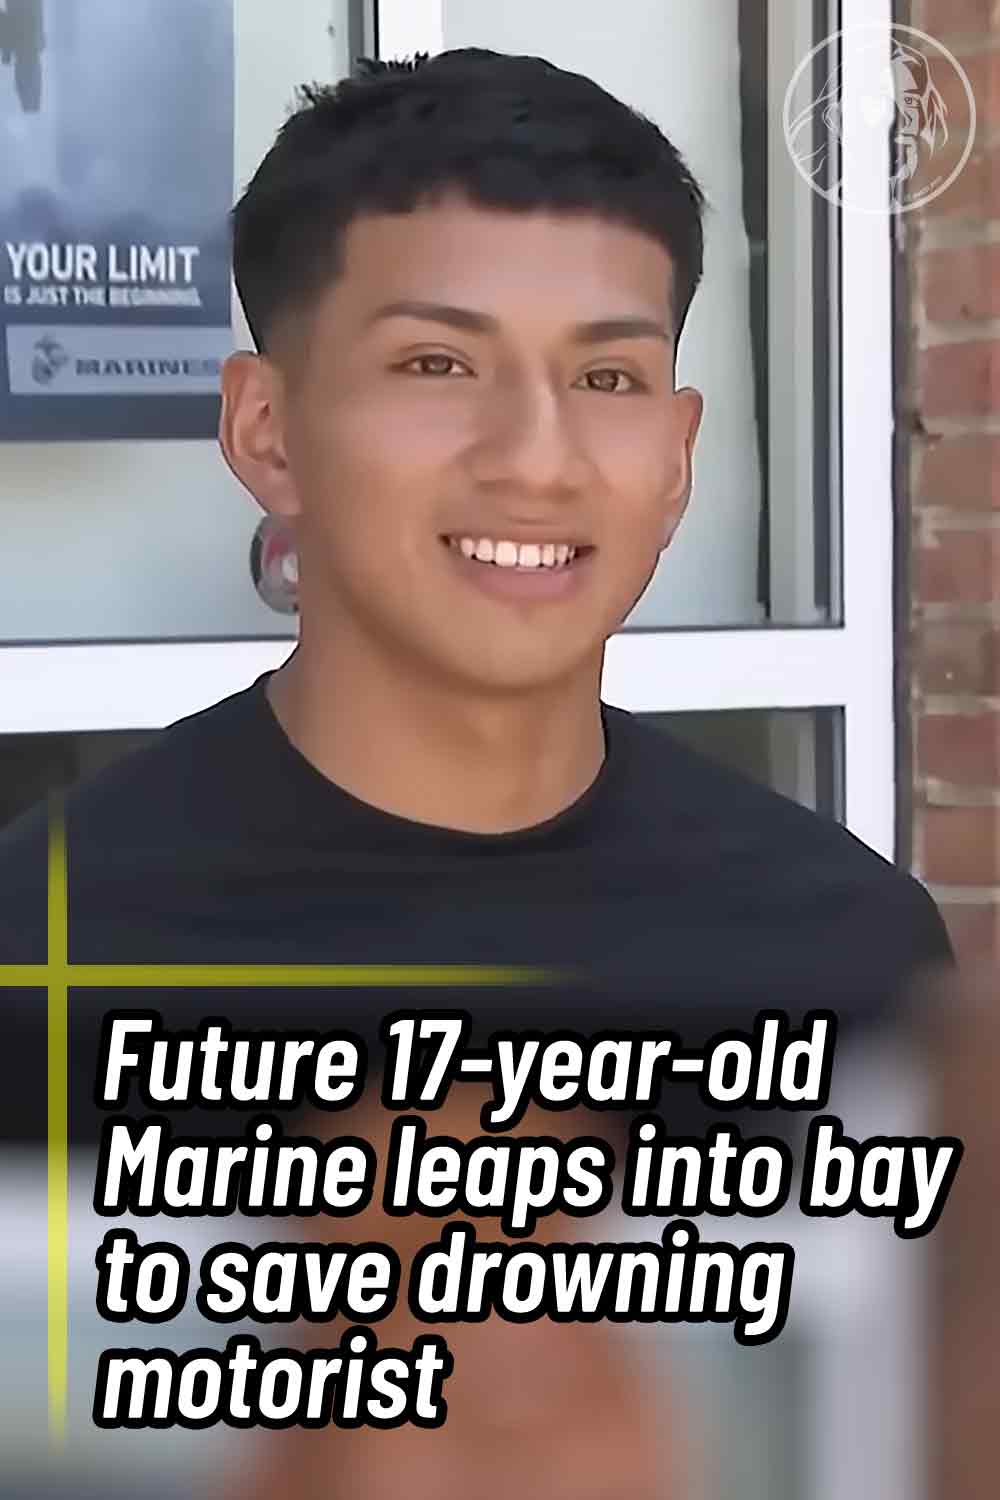 Future 17-year-old Marine leaps into bay to save drowning motorist